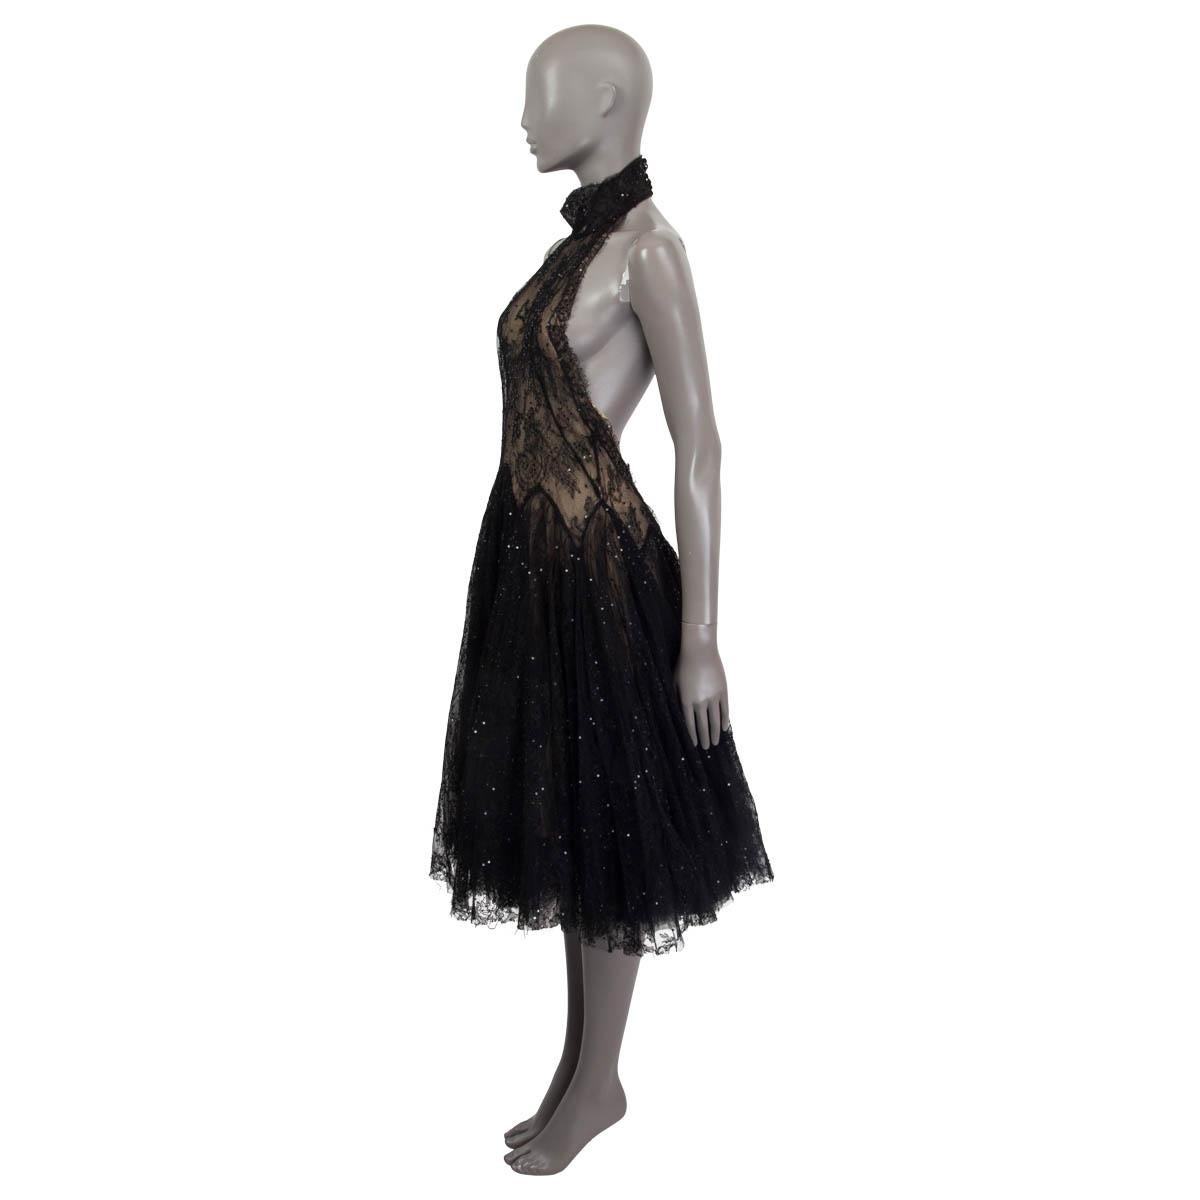 100% authentic Alexander McQueen knee length sequins embellished cocktail dress in black and beige viscose (70%) and polyamide (30%). Features a halter neck that opens with six buttons on the back (one button shows a faint stain), two tulle layers